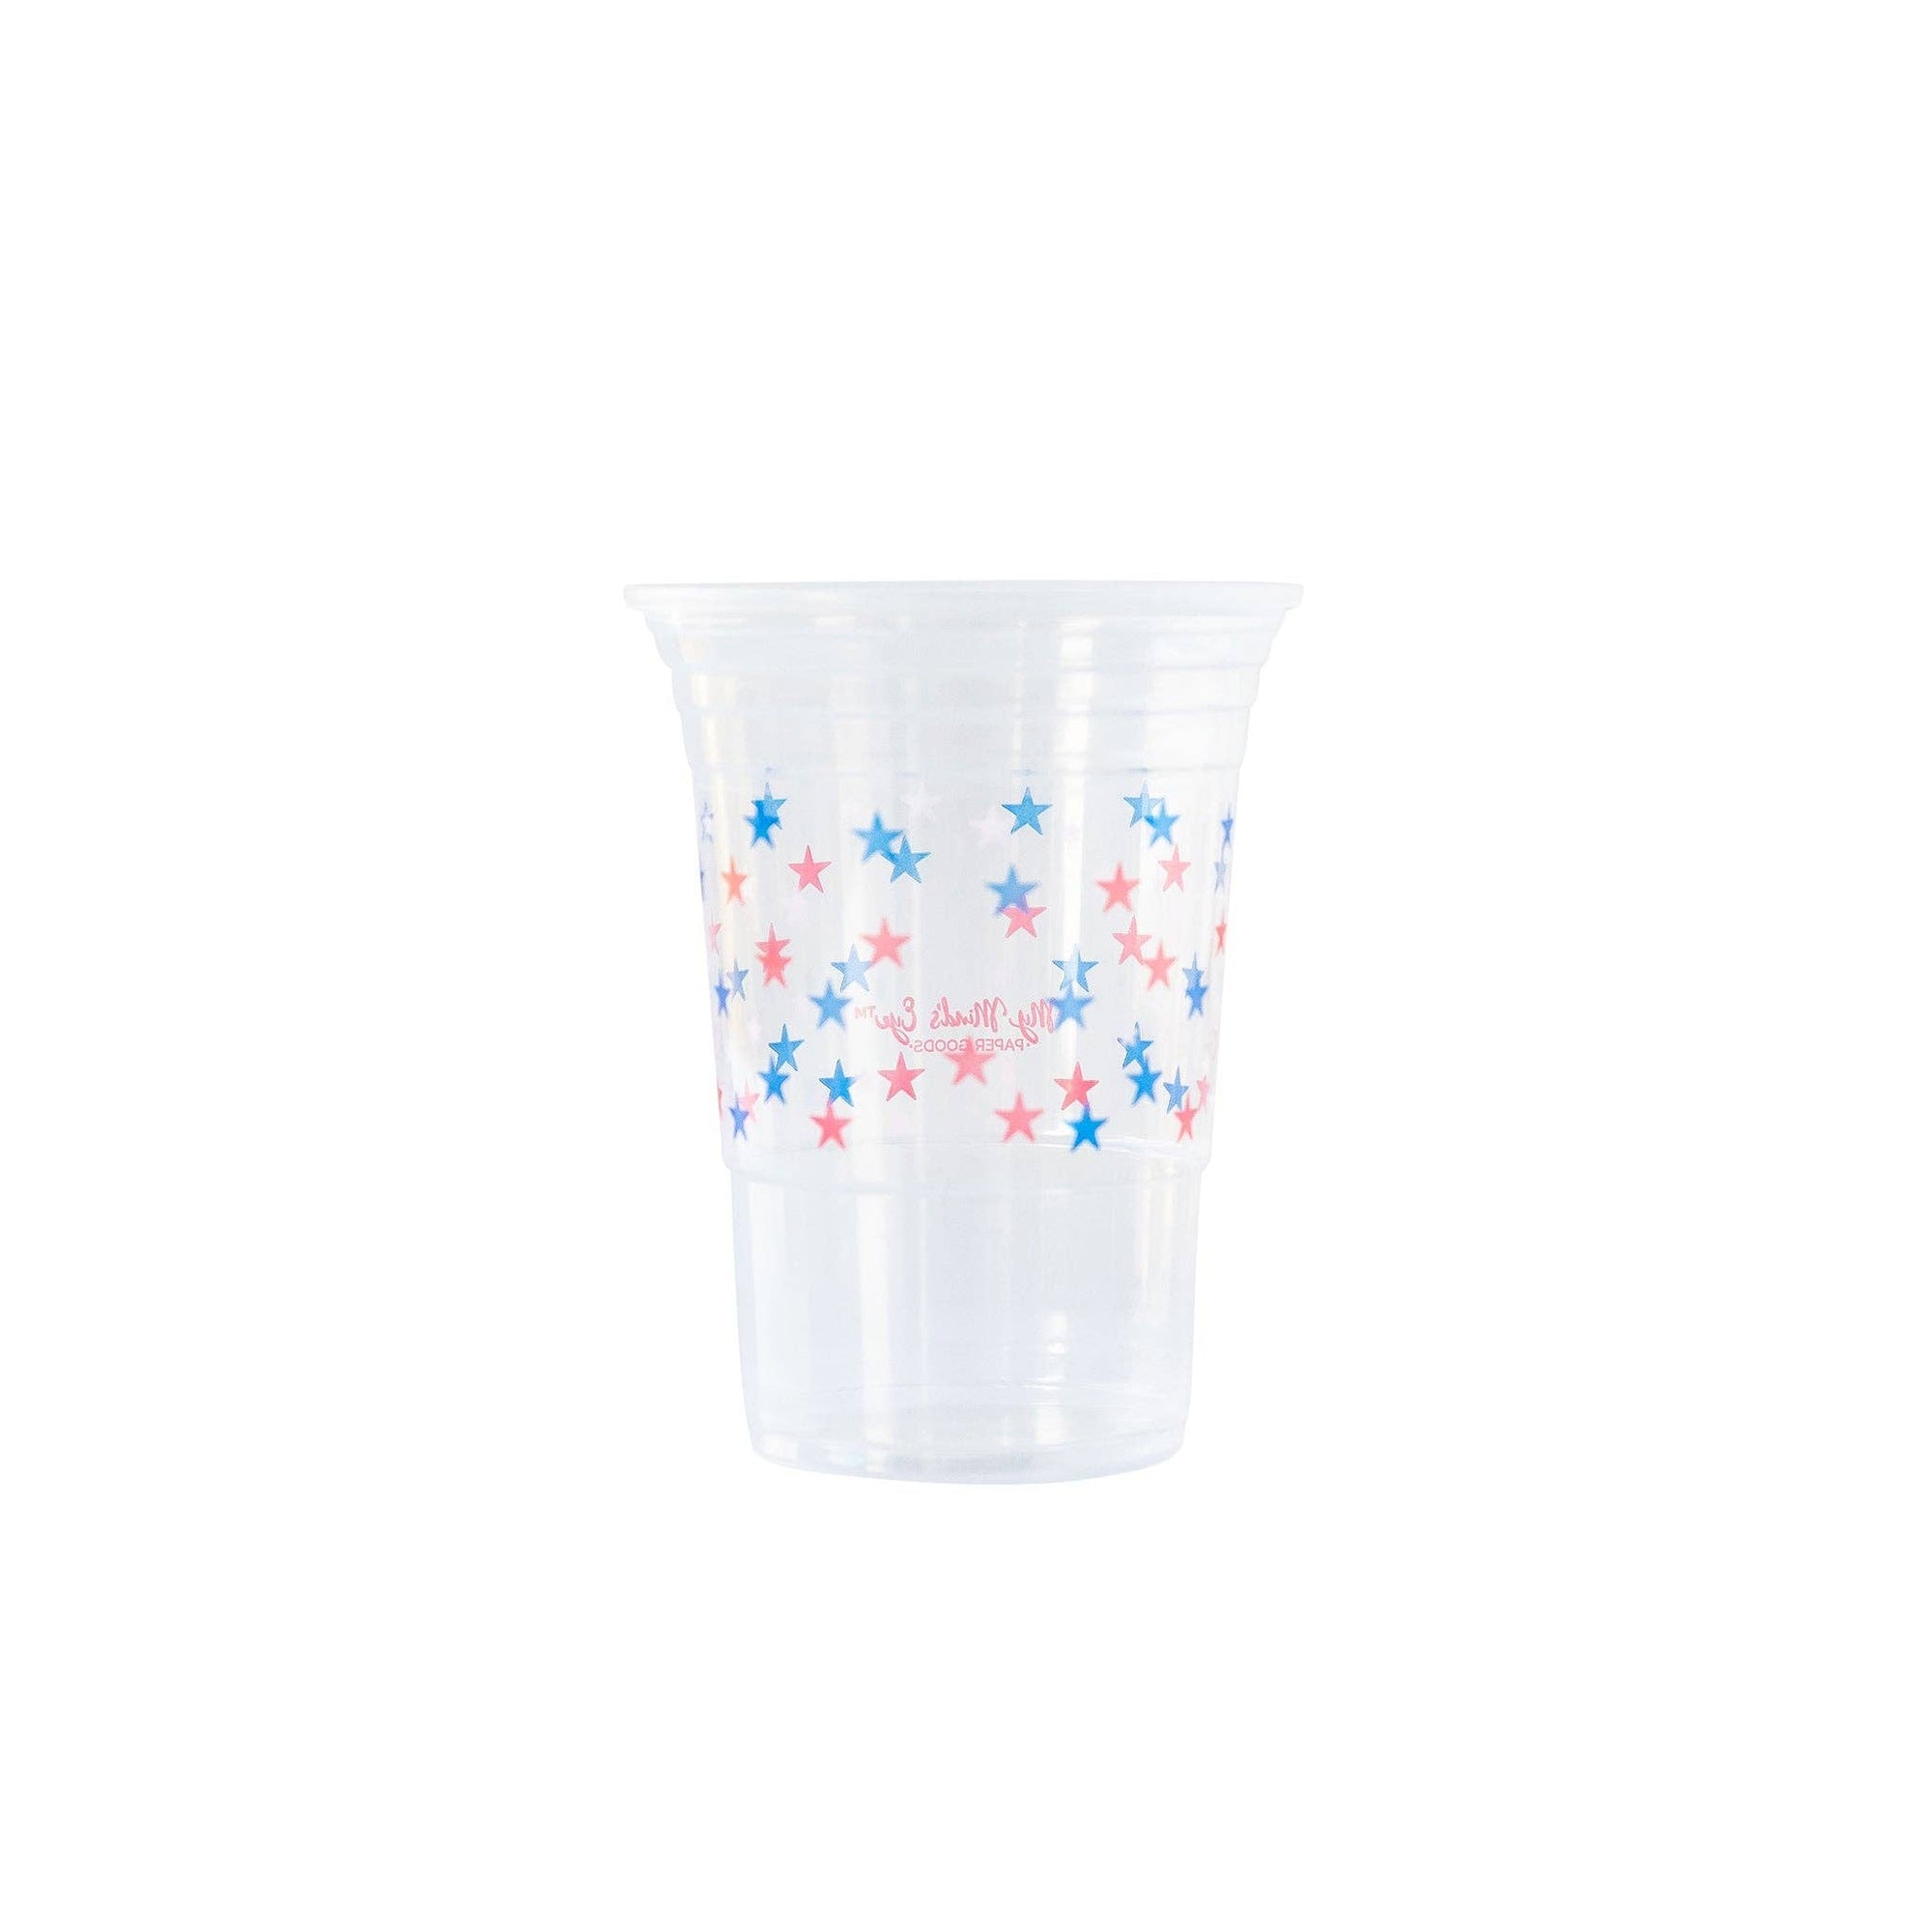 Lots of Stars Plastic Party Cups - The Preppy Bunny